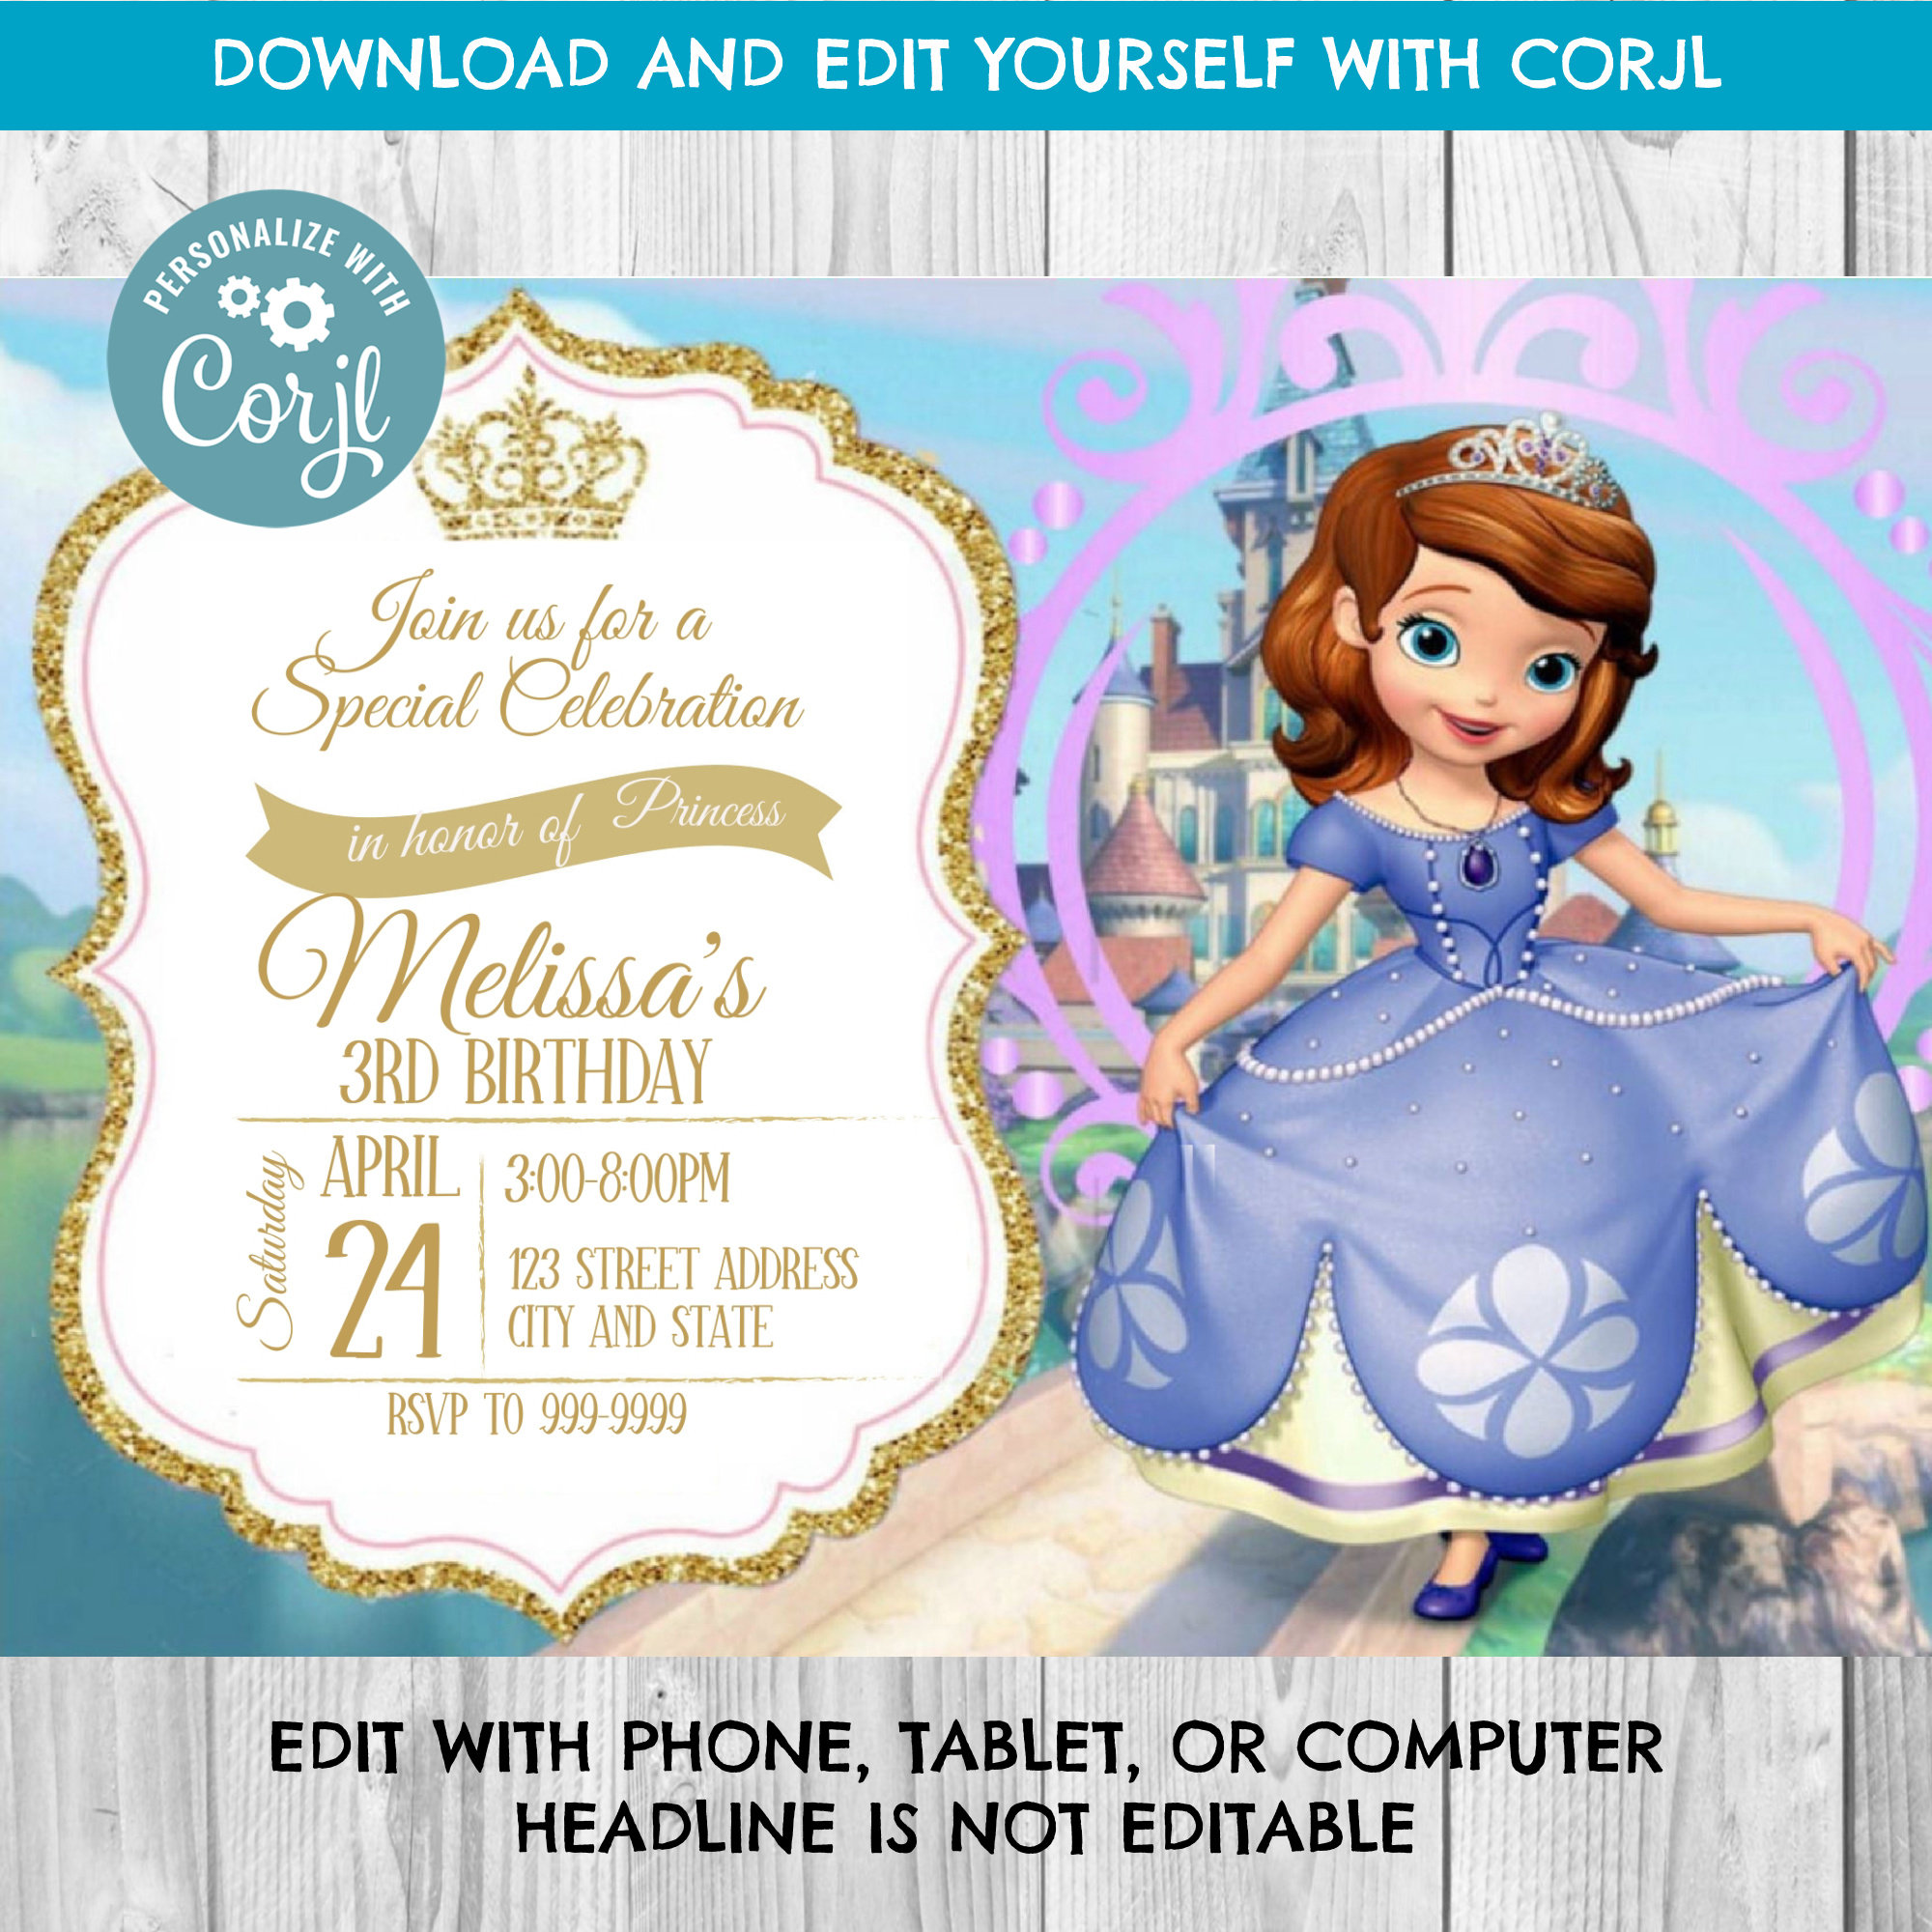 Sofia The First Personalized Birthday Invitations More Designs Inside! 